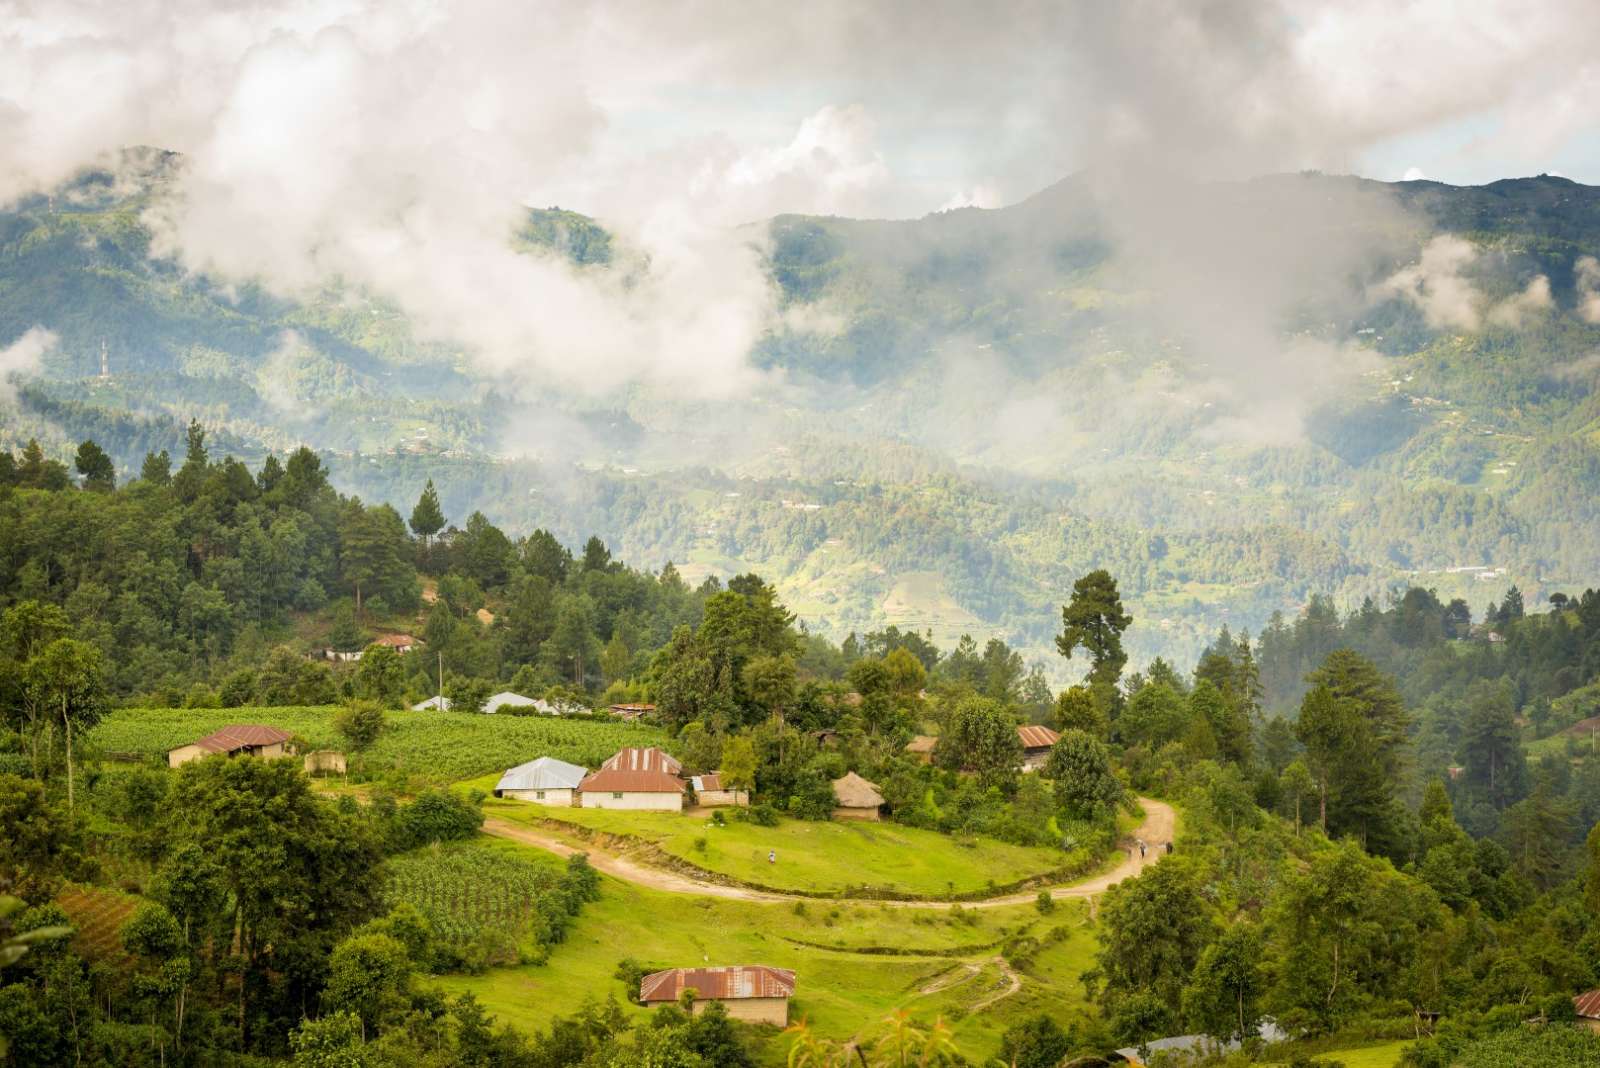 Rural landscape within the Ixil Triangle of Guatemala